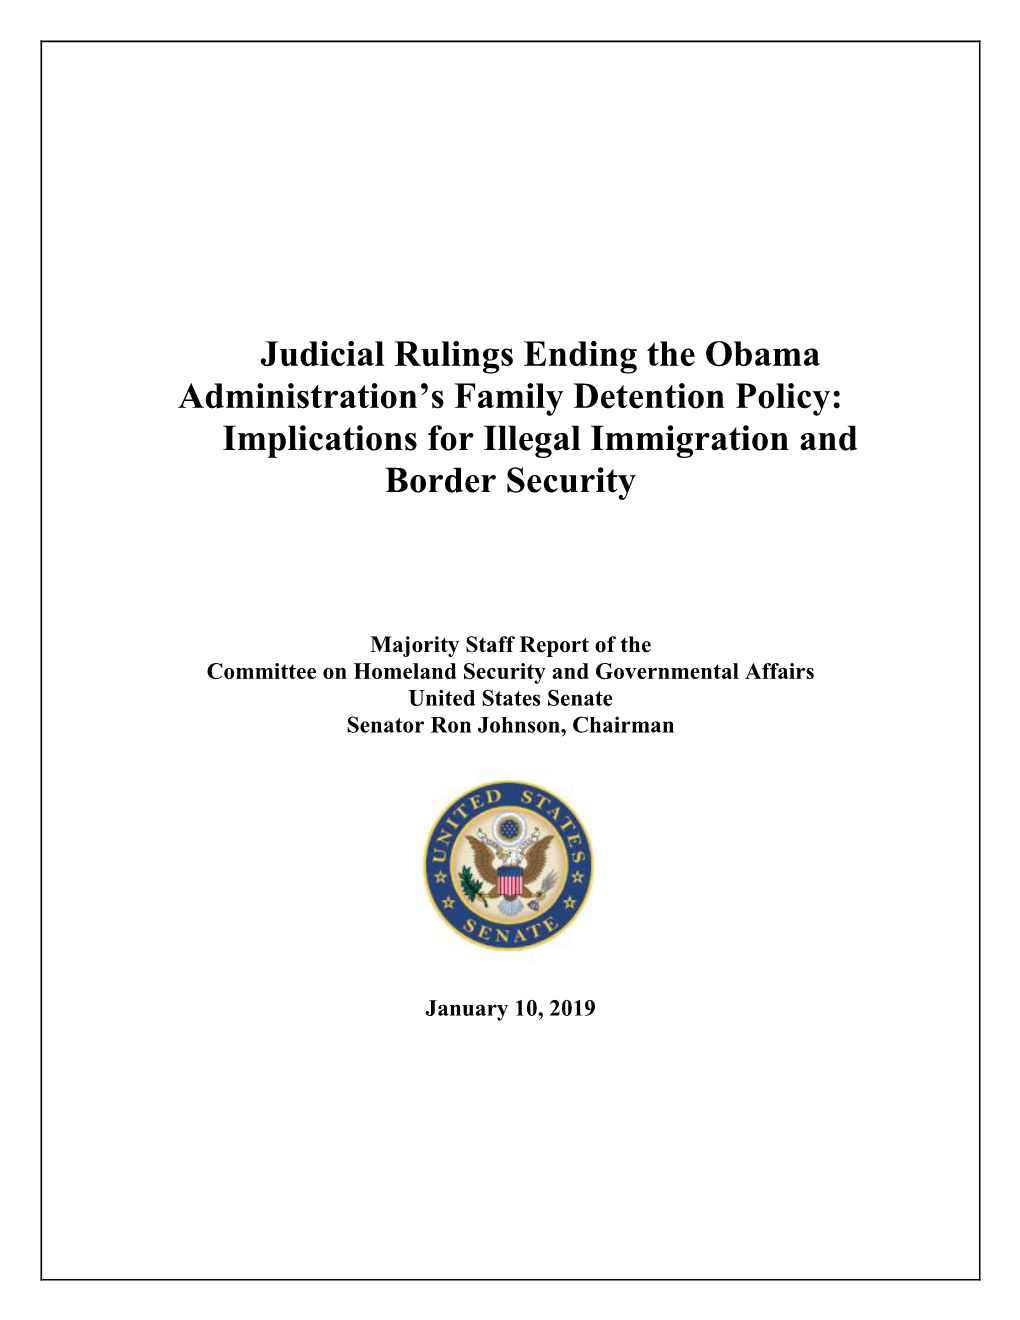 Judicial Rulings Ending the Obama Administration's Family Detention